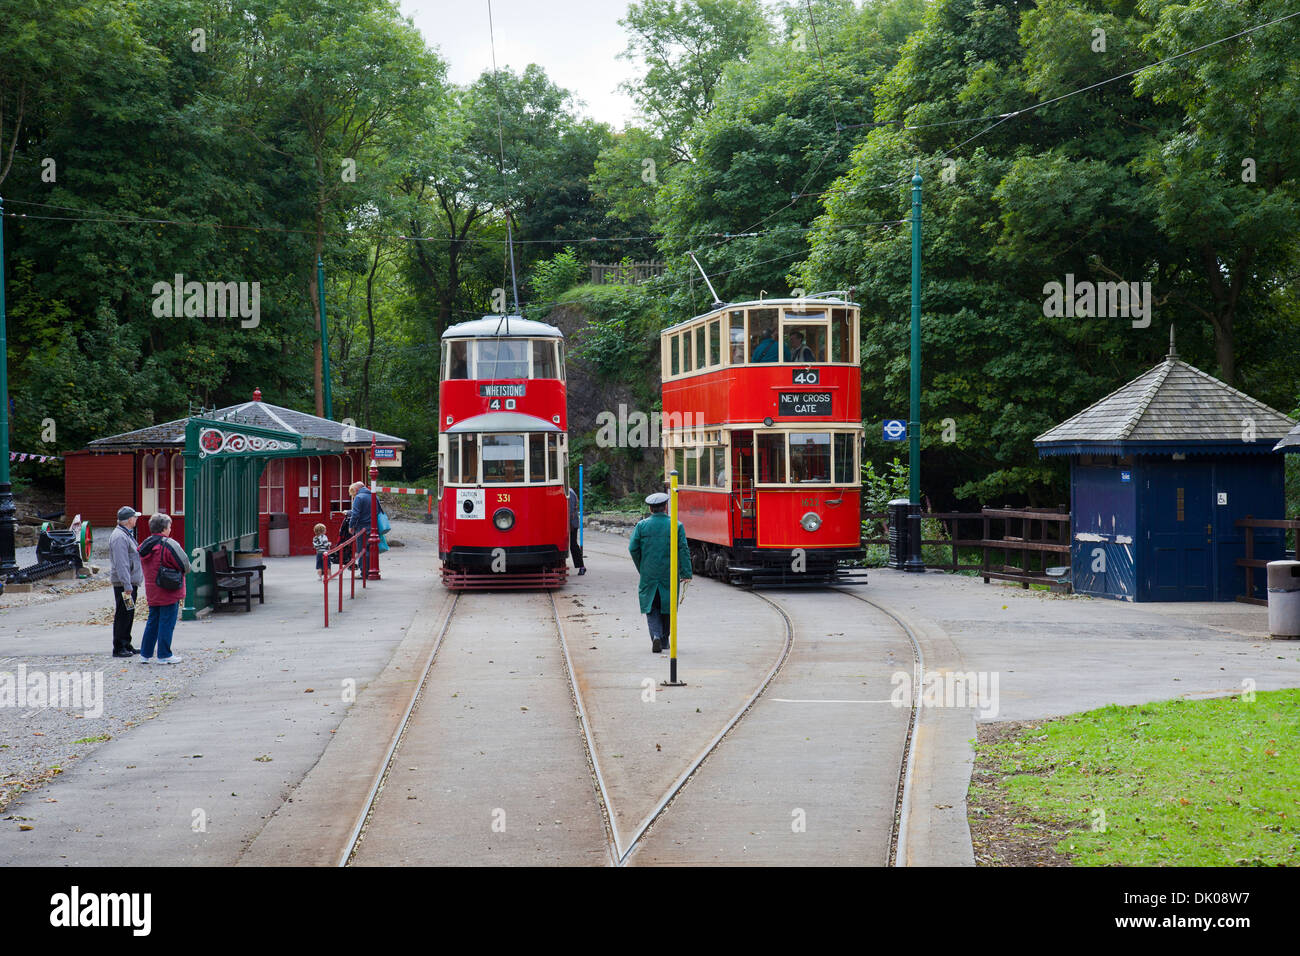 Metropolitan Electric Tramways No:331 (1930) & London No:1622 (1912) trams at the National Tramway Museum, Crich, Derbyshire, UK Stock Photo